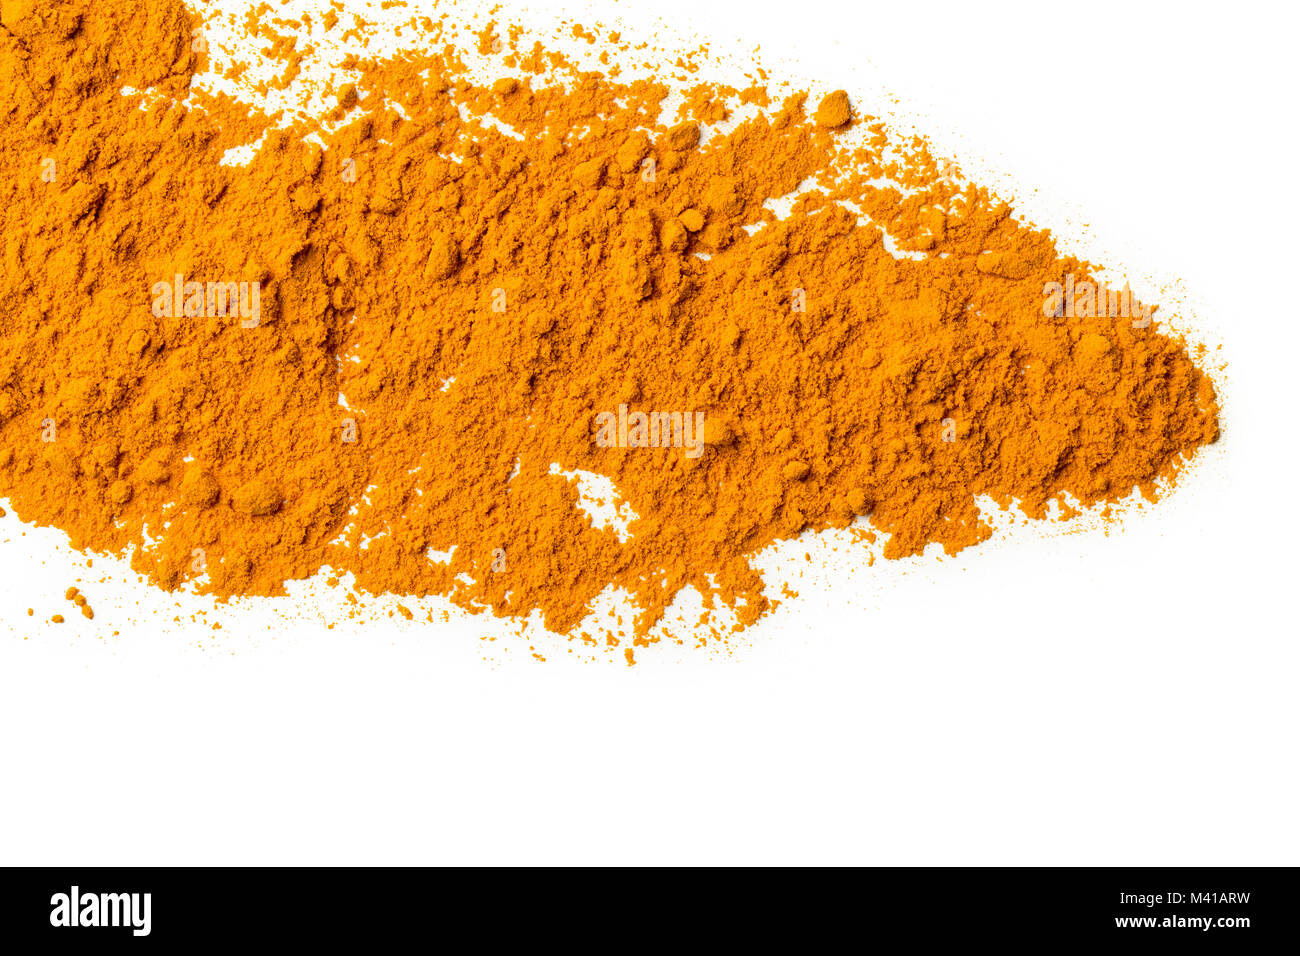 Curcuma ground powder isolated on white background, view from above, close-up.l Stock Photo